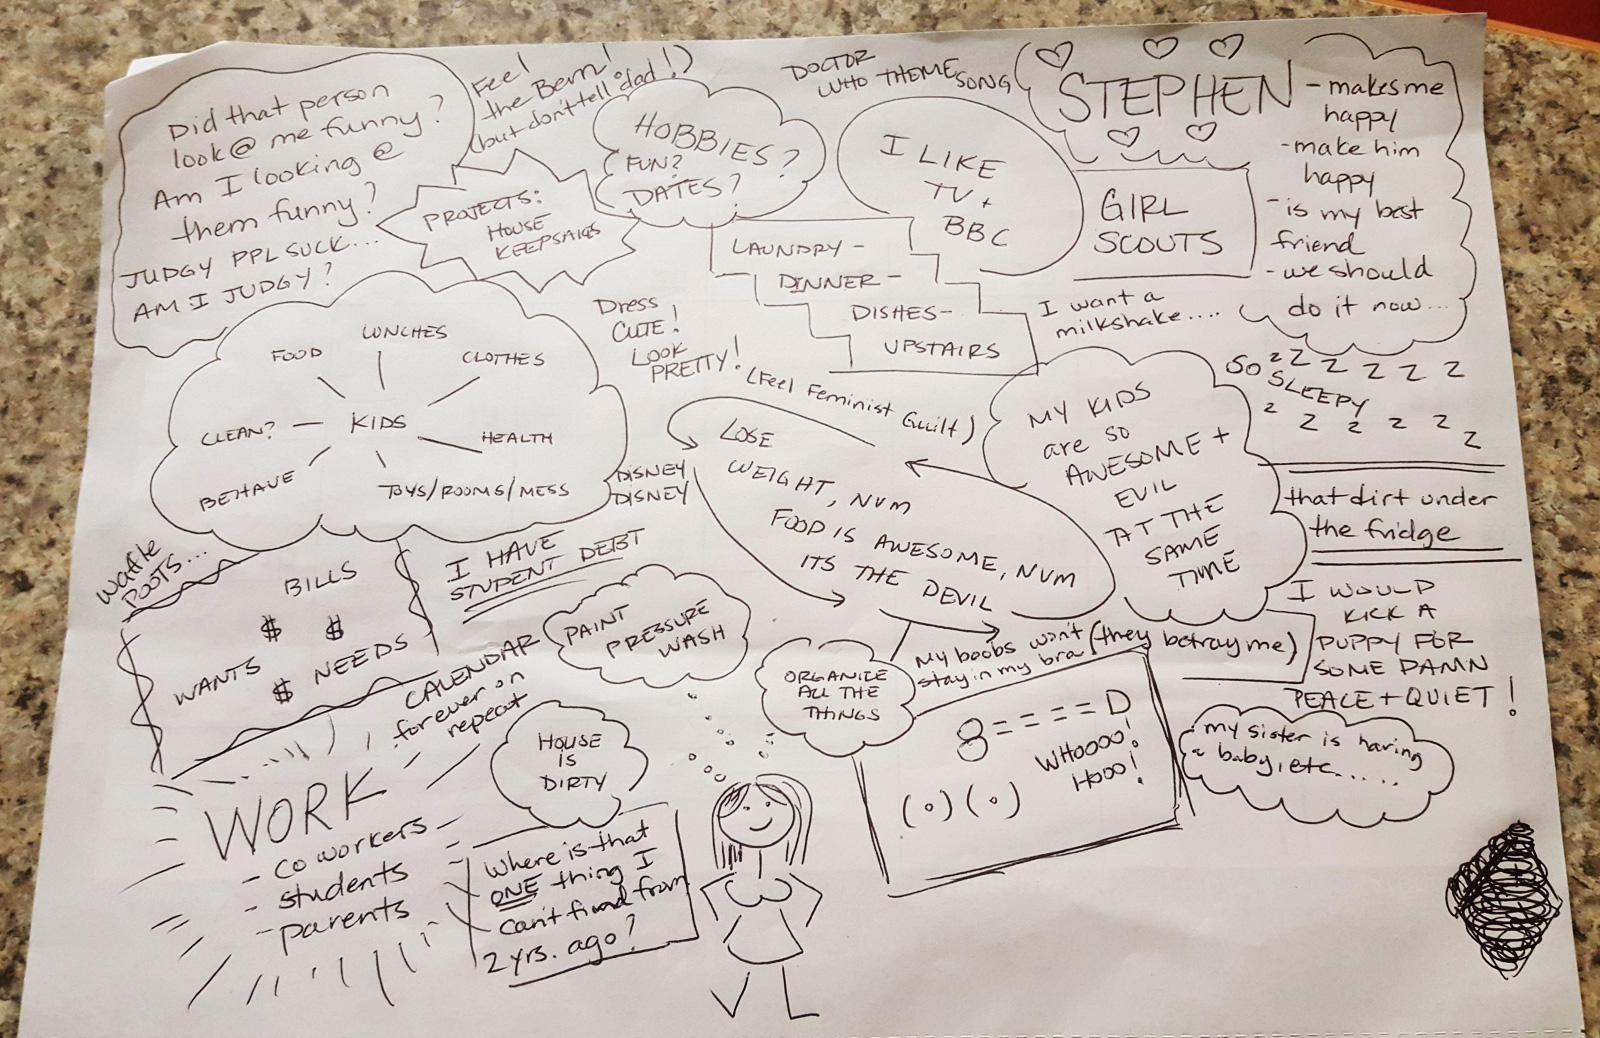 Husband asks wife to draw what's on her mind